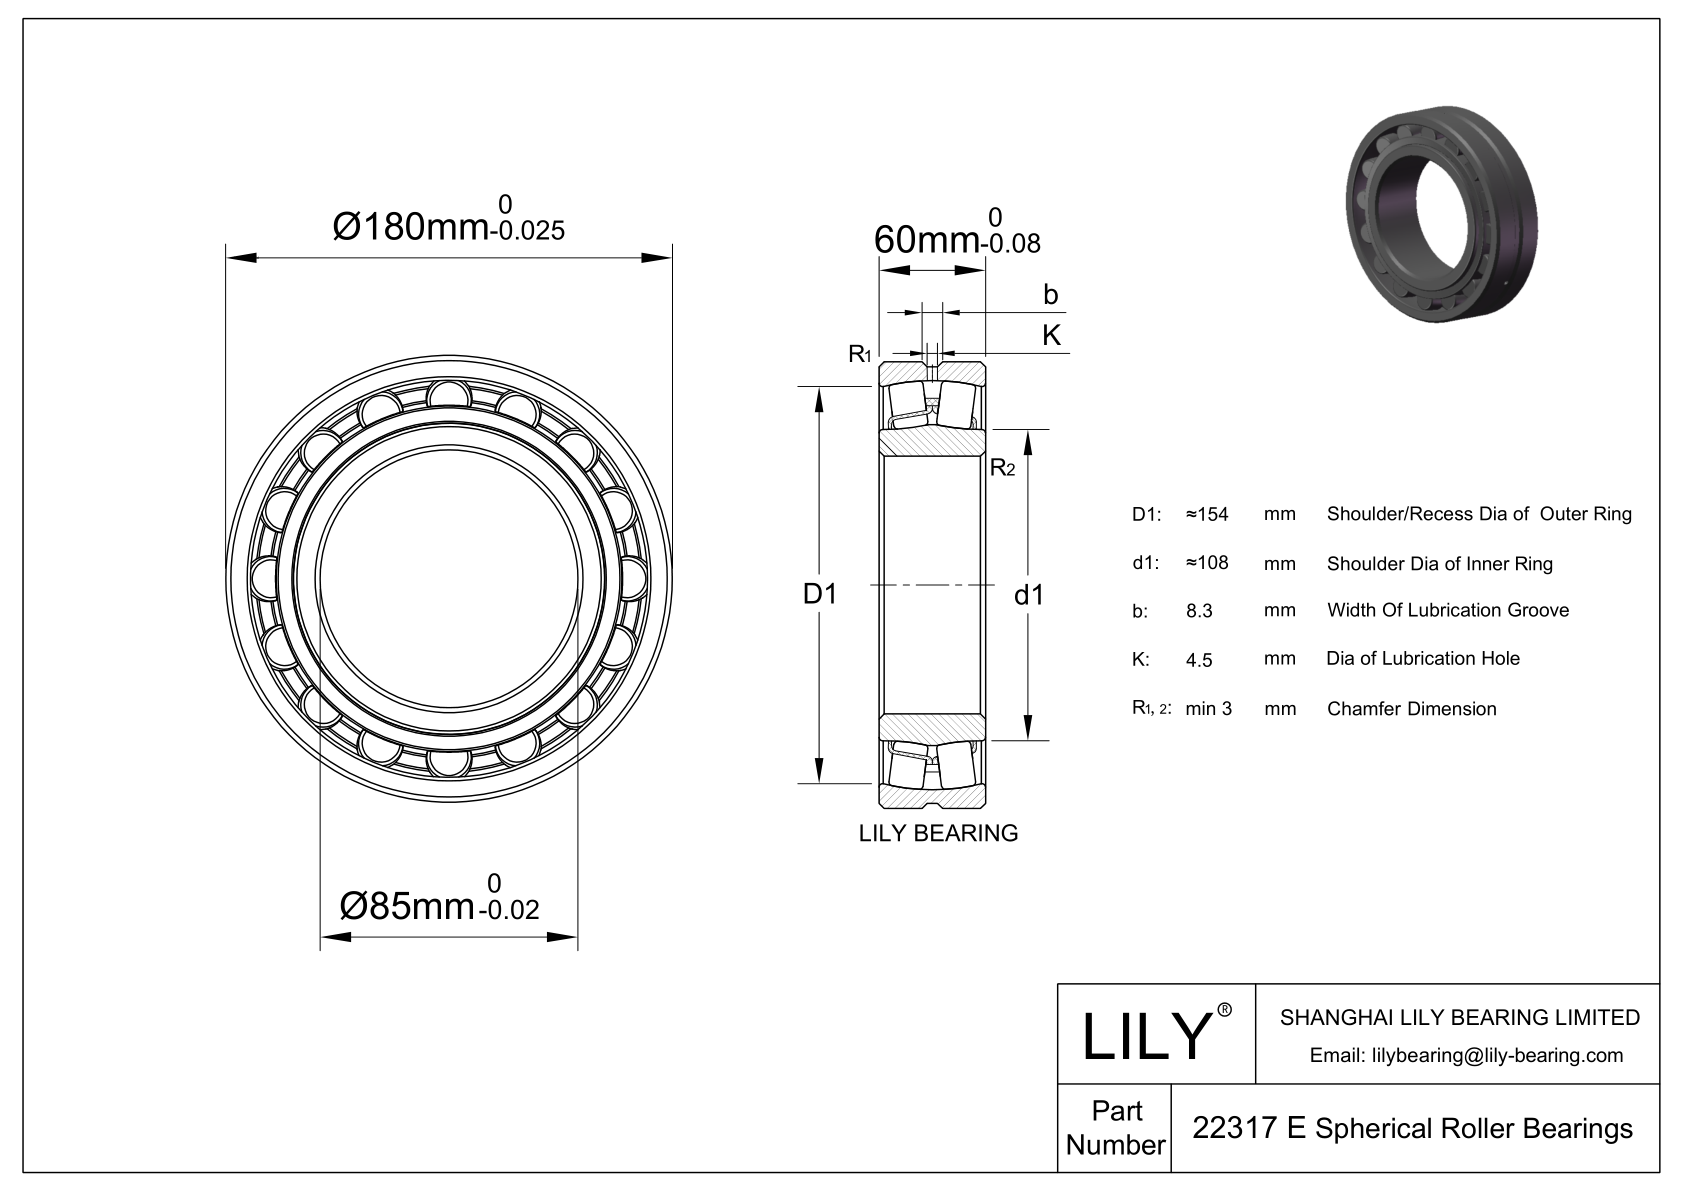 22317 E Double Row Spherical Roller Bearing cad drawing